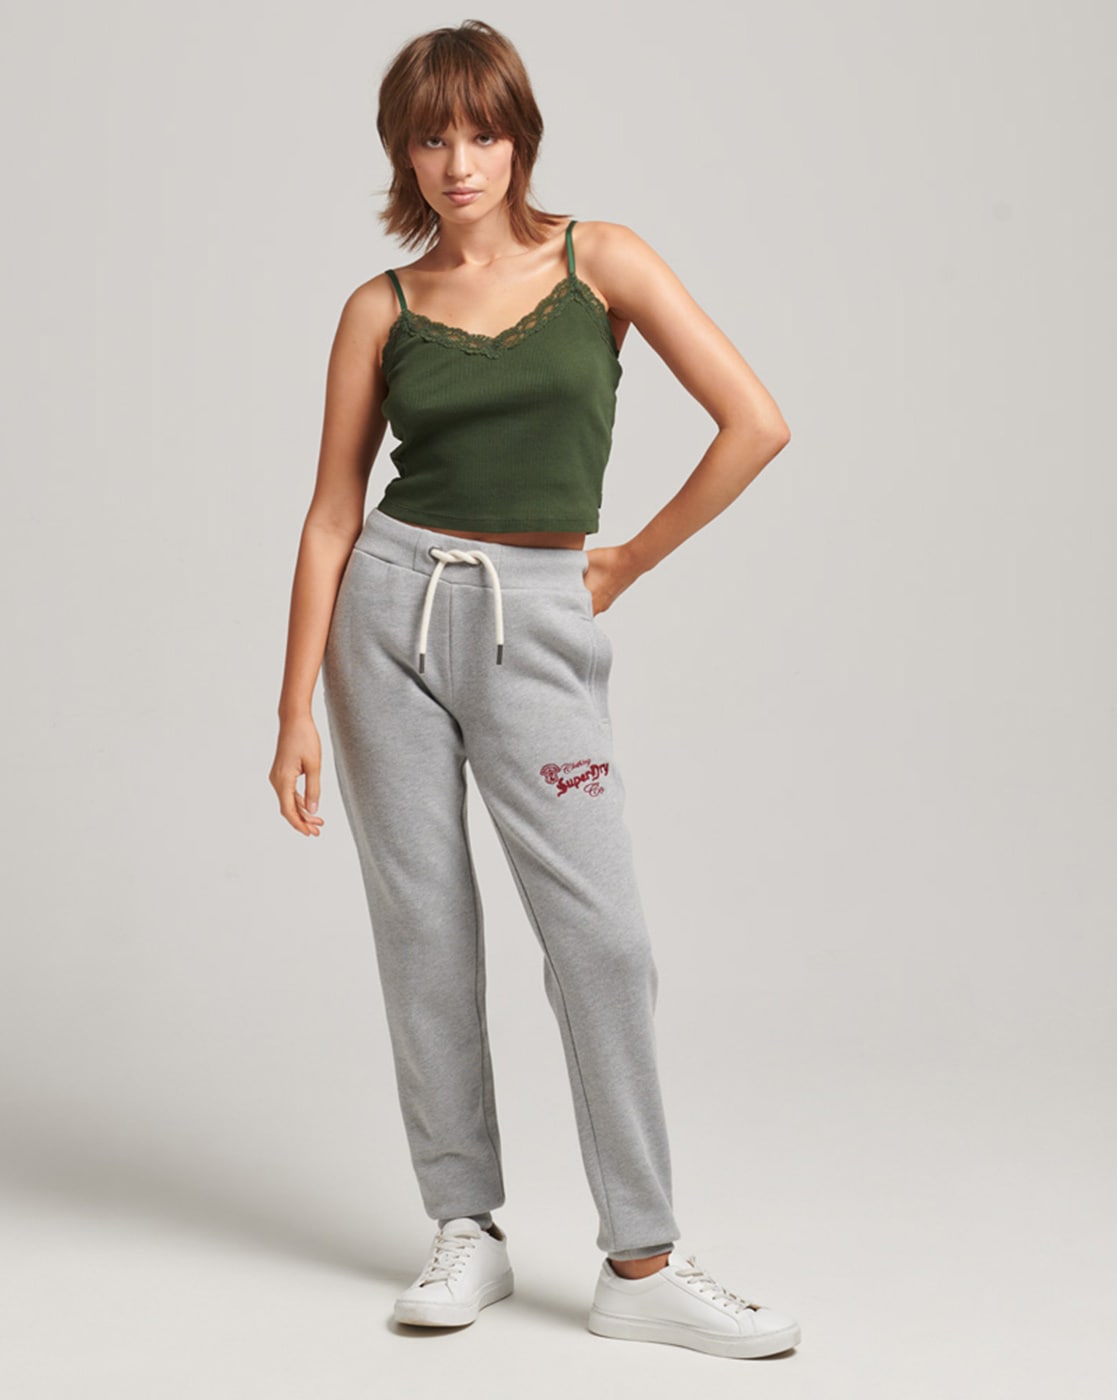 Buy Superdry Womens Track Pants G70000XNF2Ice MarlL at Amazonin